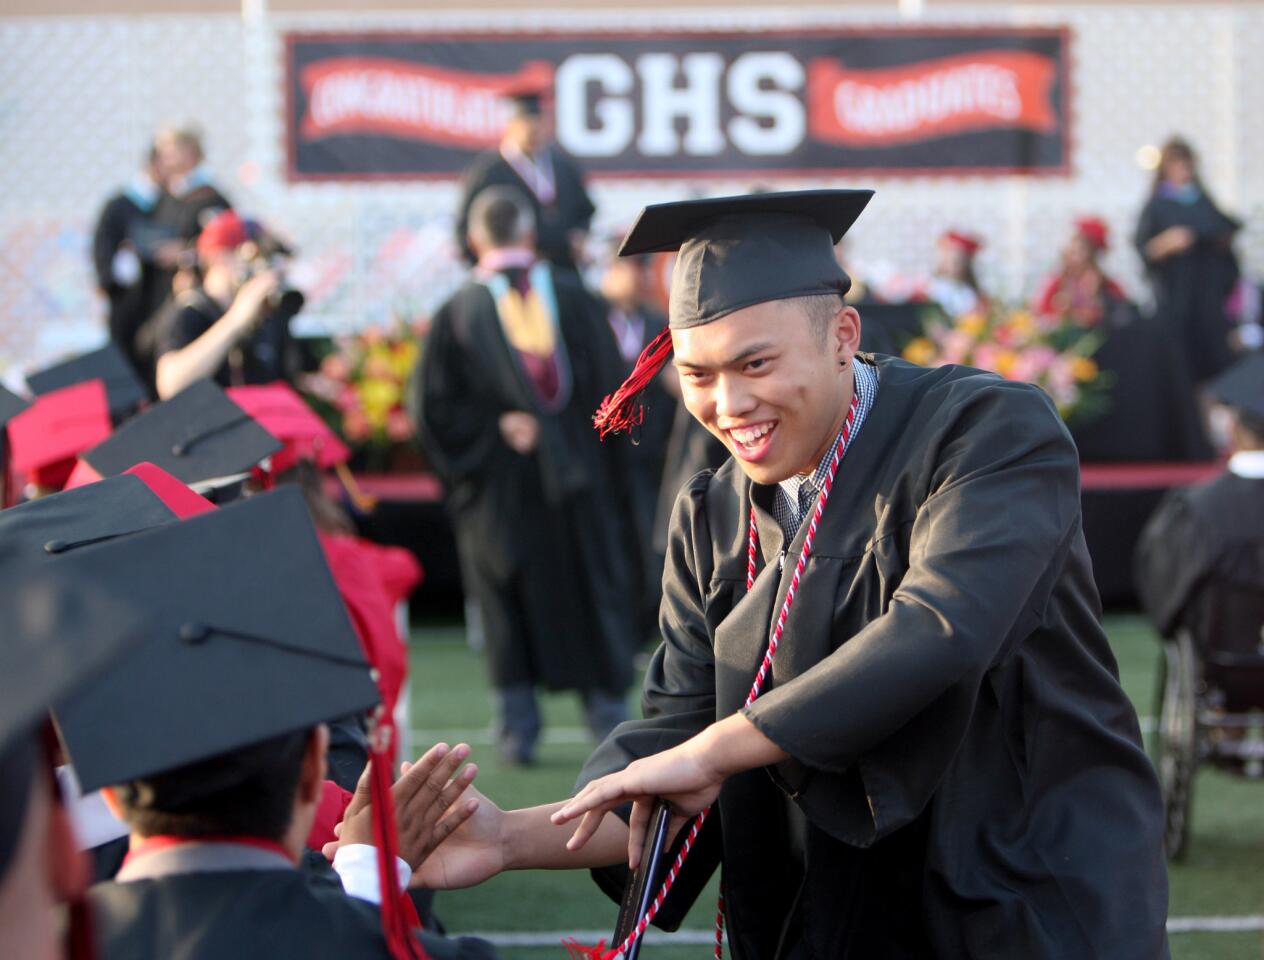 Graduate Eli Pajulas gets some high-fives after getting his diploma at the Glendale High School commencement ceremony at the school in Glendale on Wednesday, June 1, 2016.